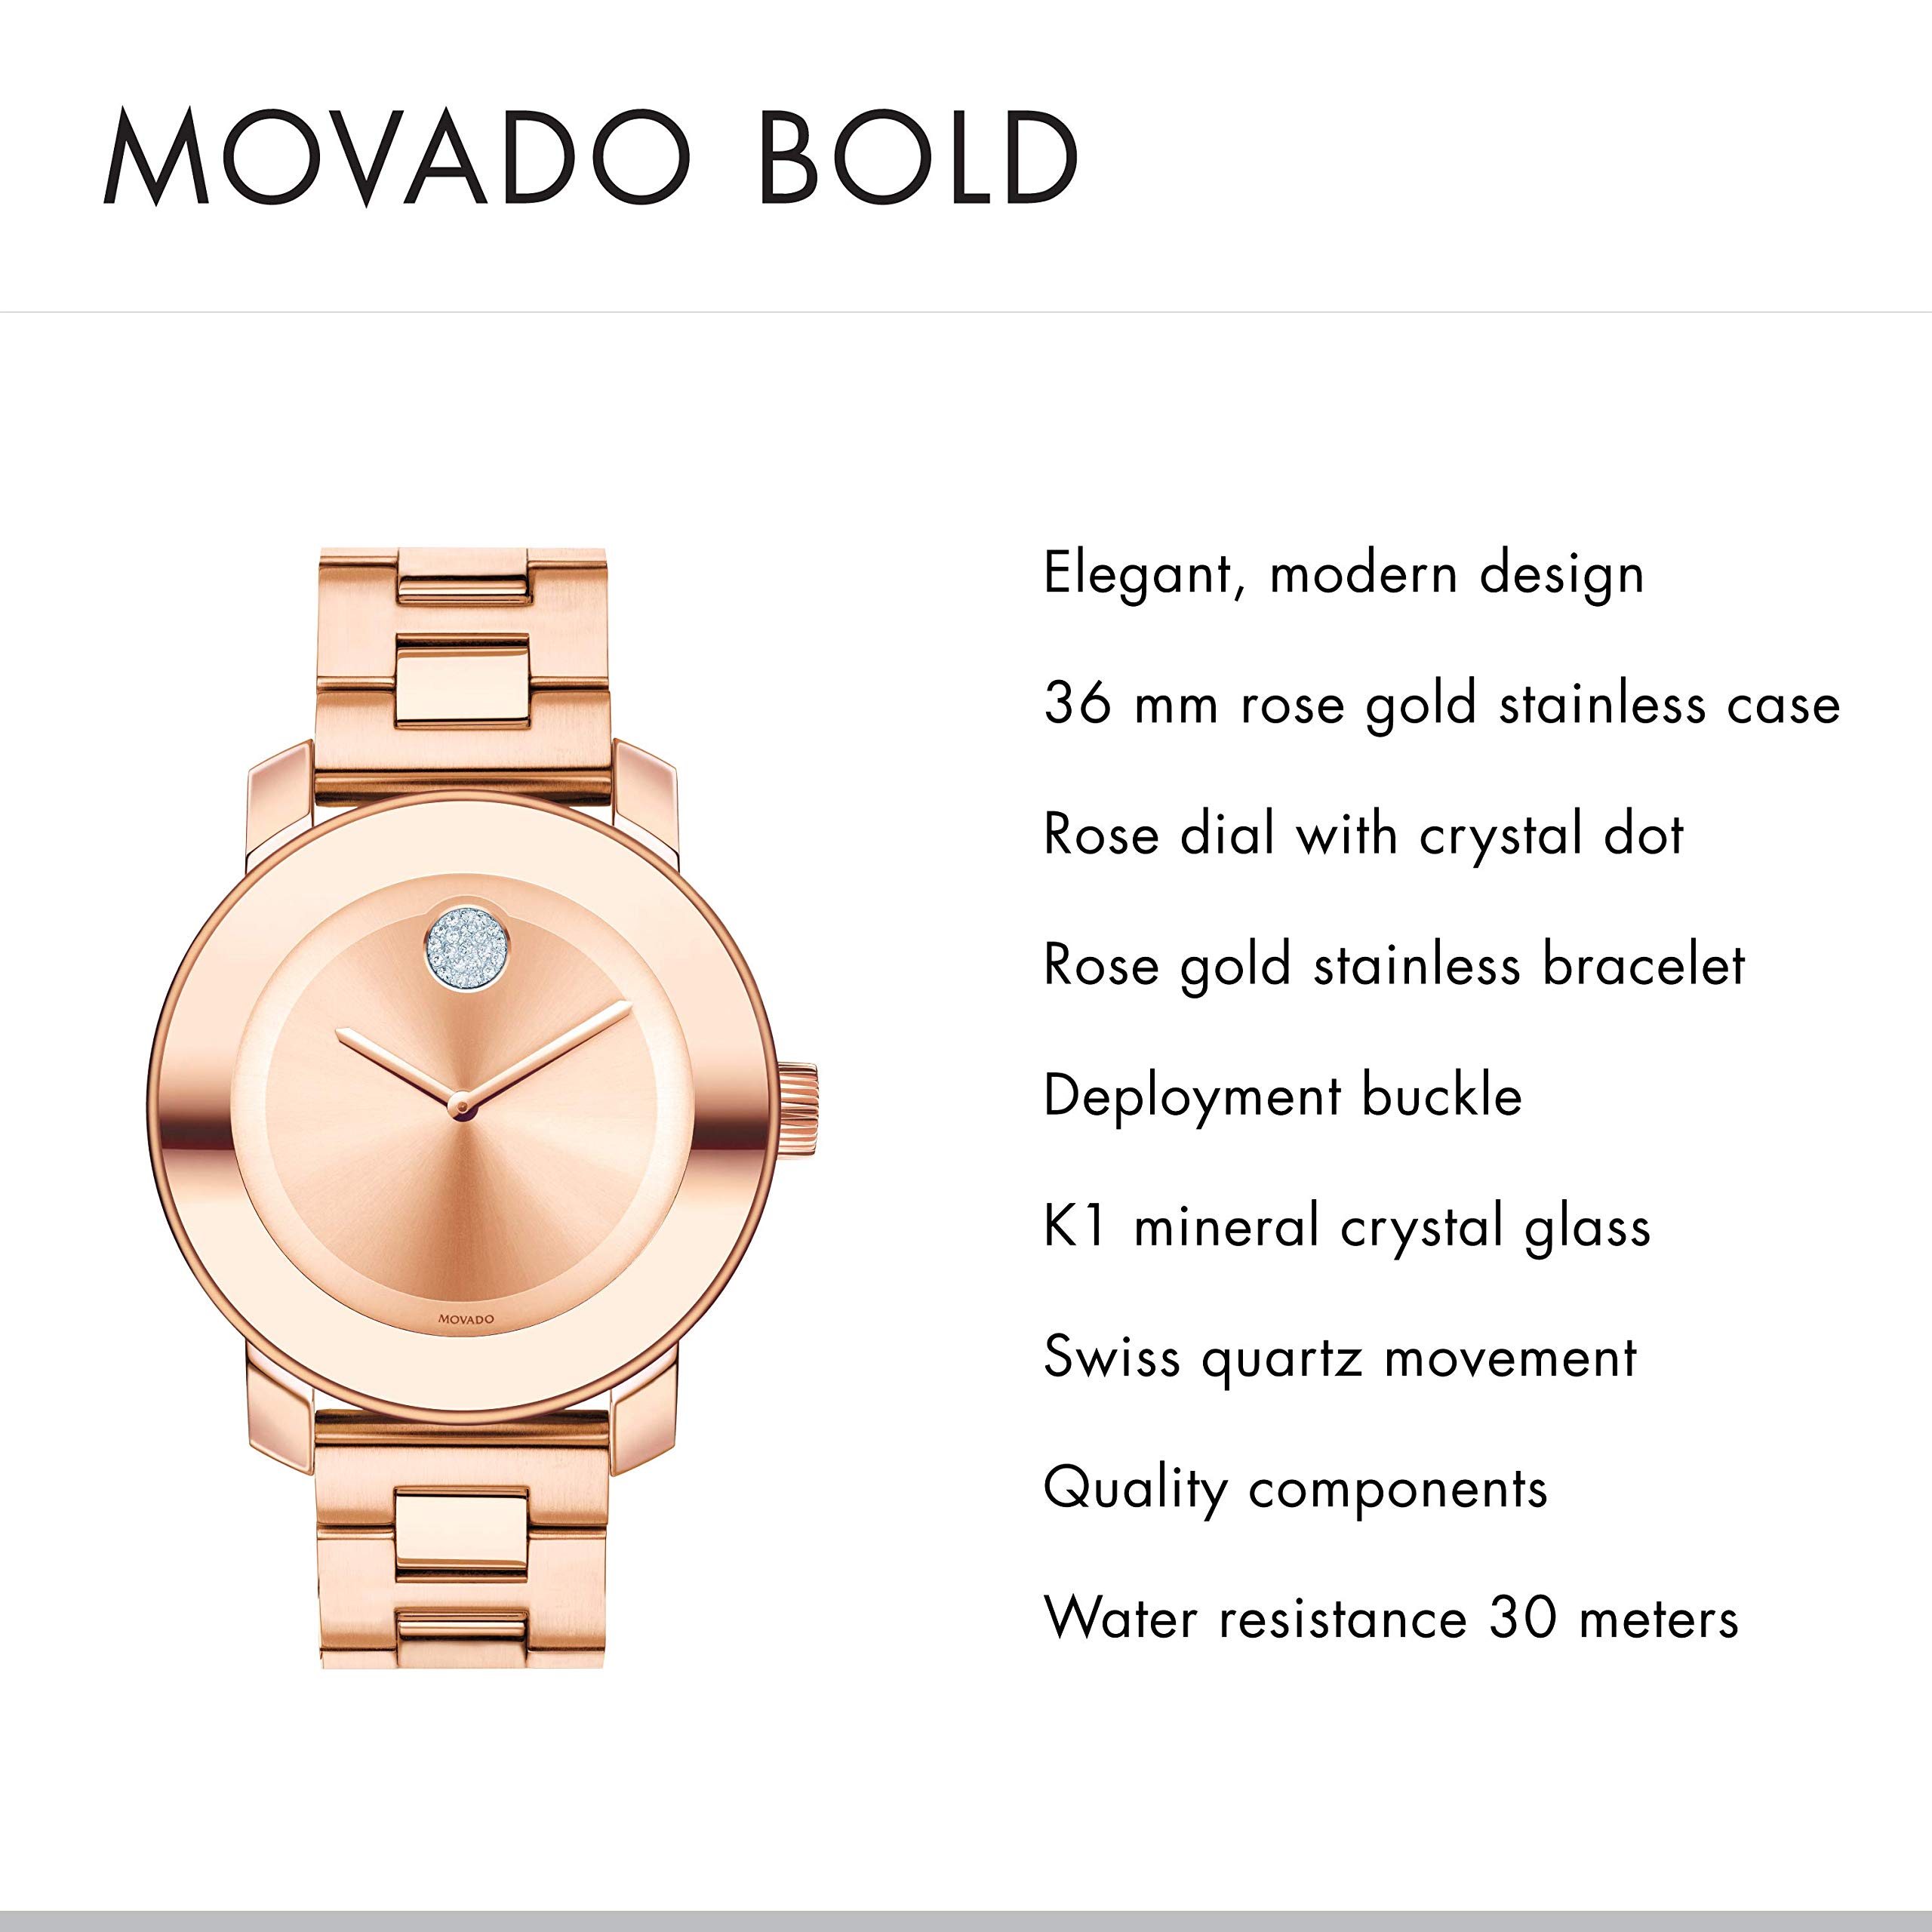 Movado Women's BOLD Iconic Metal Rose Gold Watch with a Flat Dot Sunray Dial, Gold/Pink (3600086)